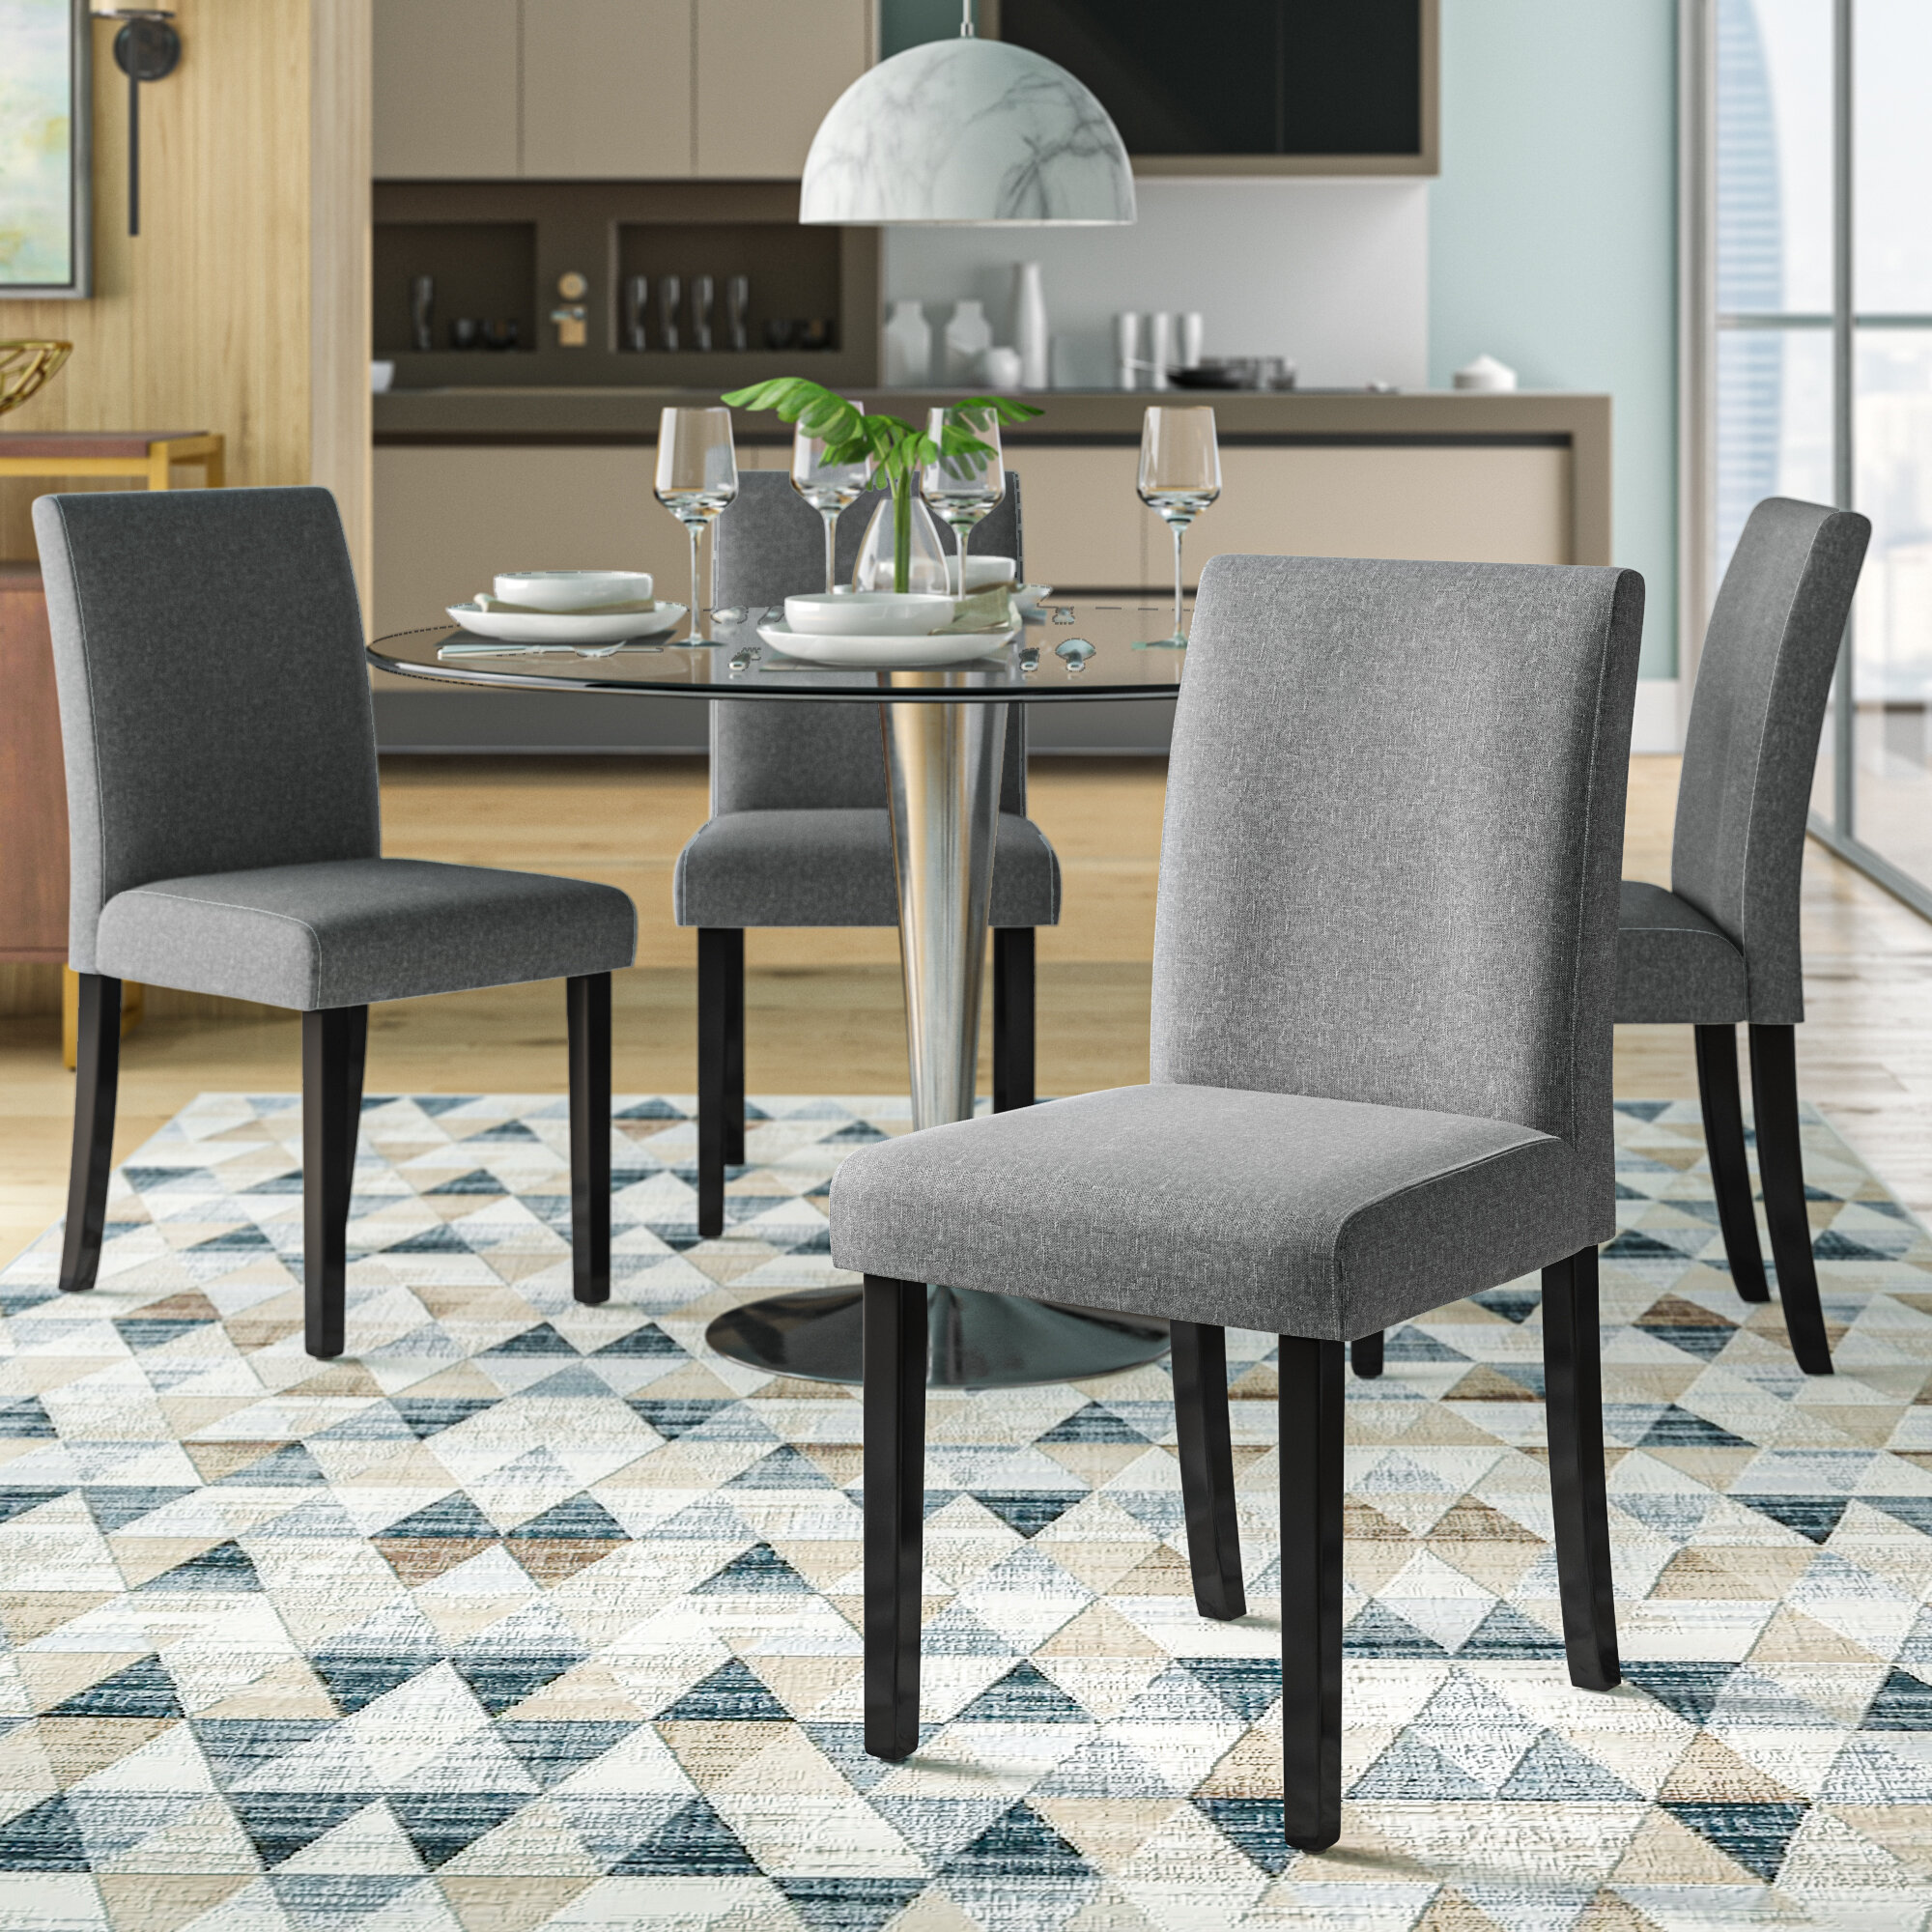 Wayfair   Fabric Kitchen & Dining Chairs You'll Love in 20